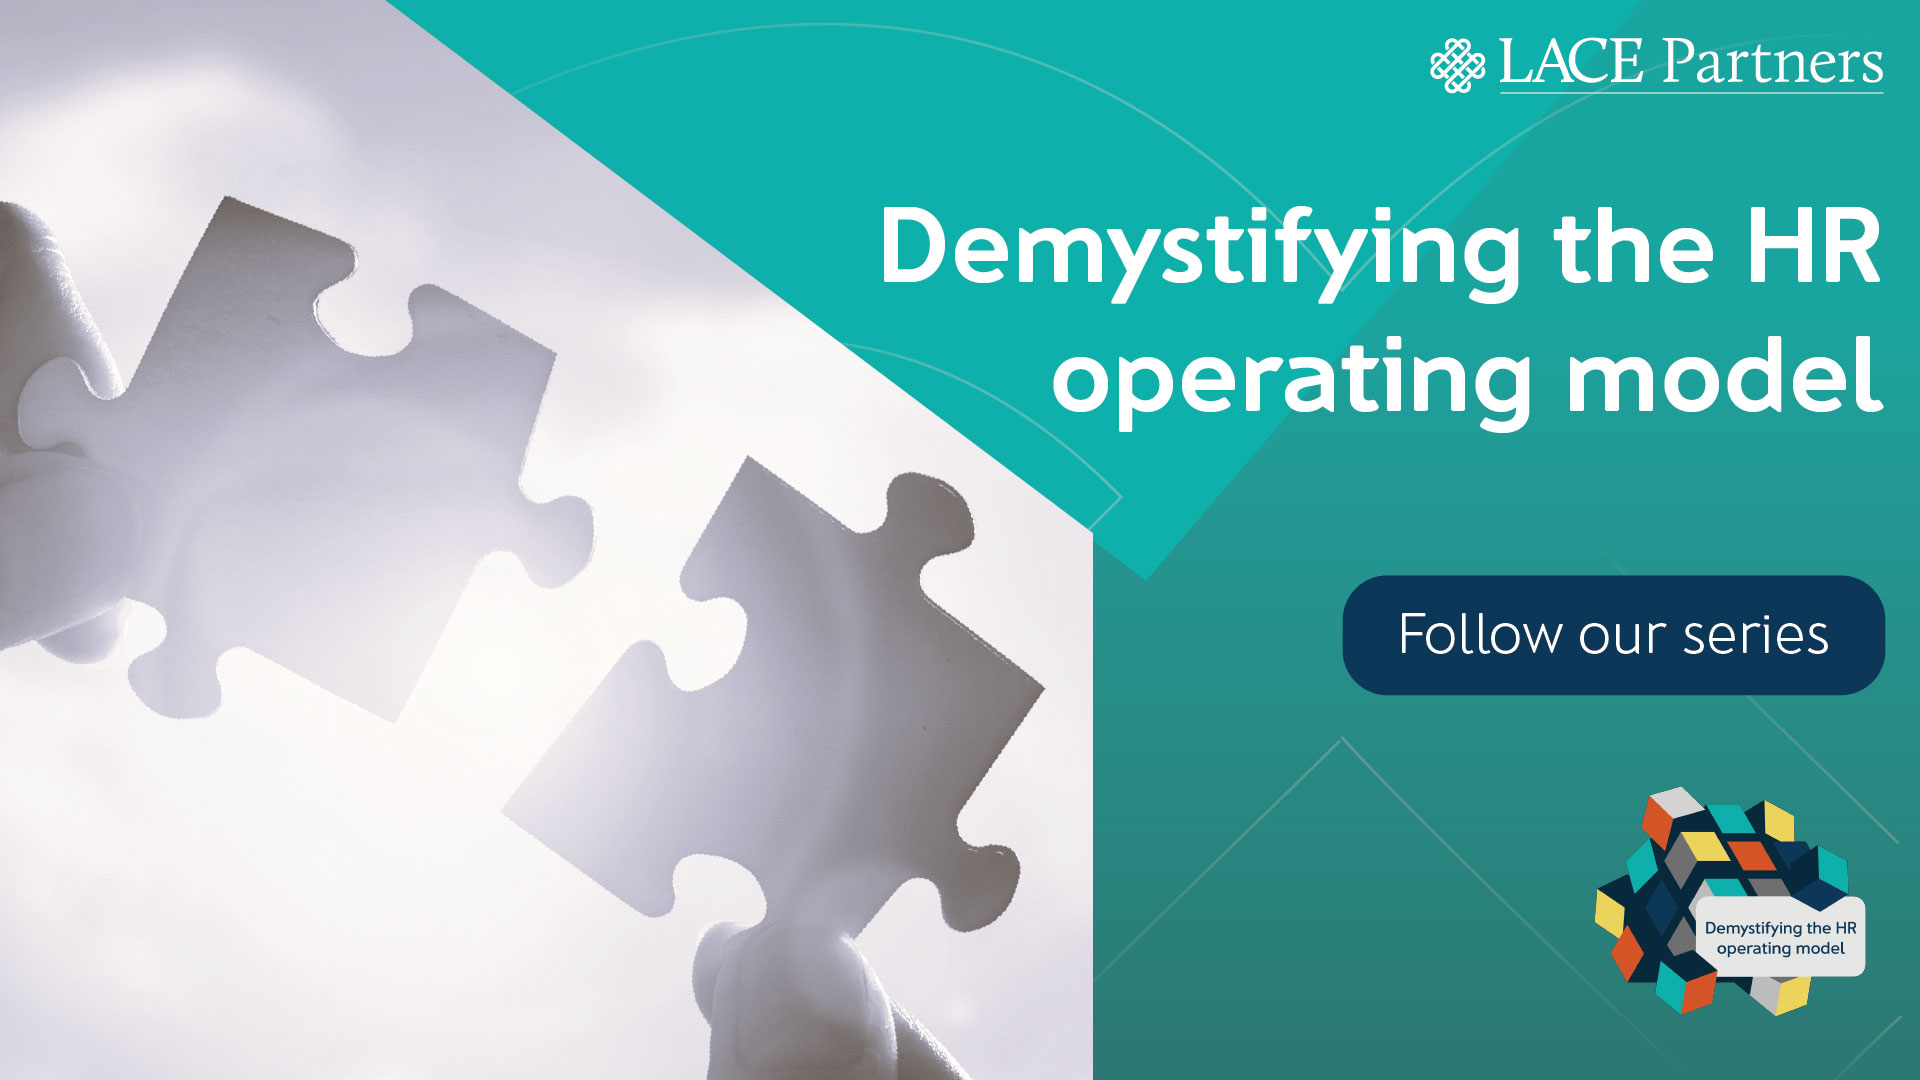 Demystifying the HR operating model - an introduction